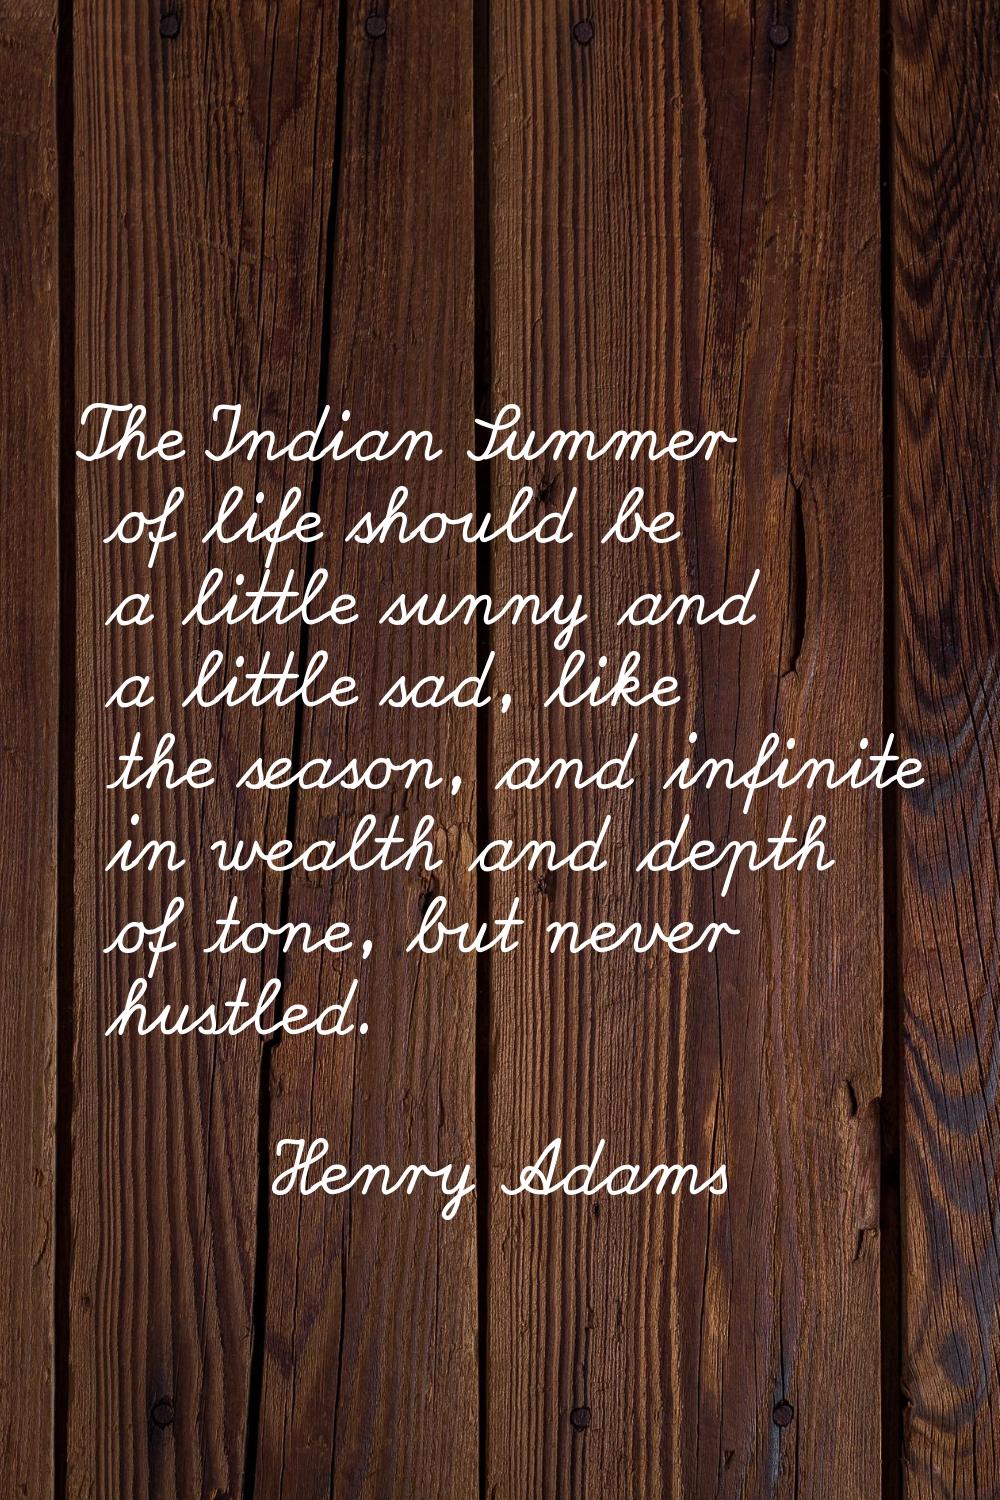 The Indian Summer of life should be a little sunny and a little sad, like the season, and infinite 